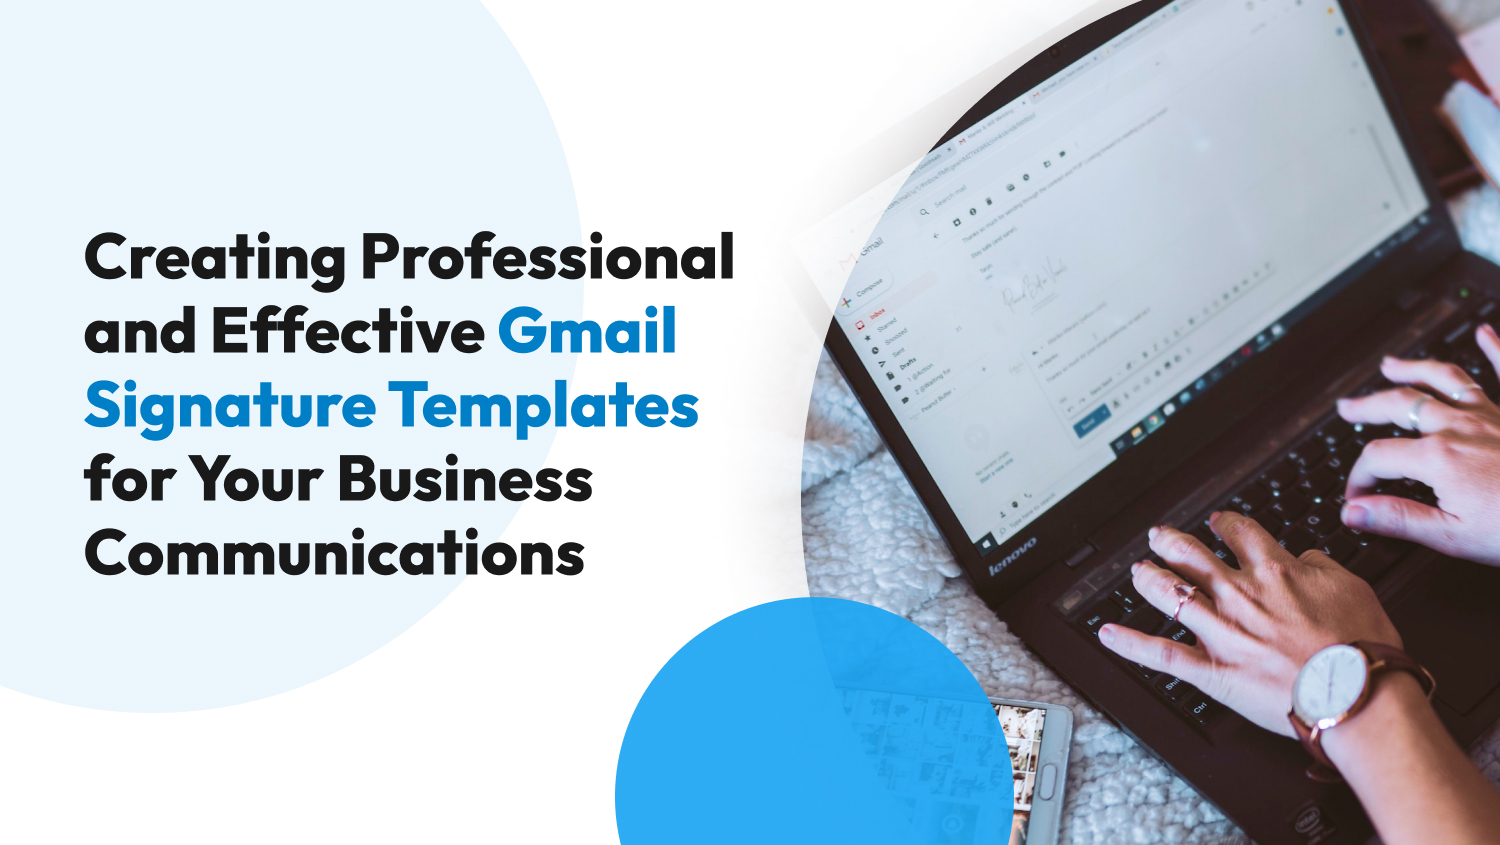 Creating Professional and Effective Gmail Signature Templates for Your Business Communications